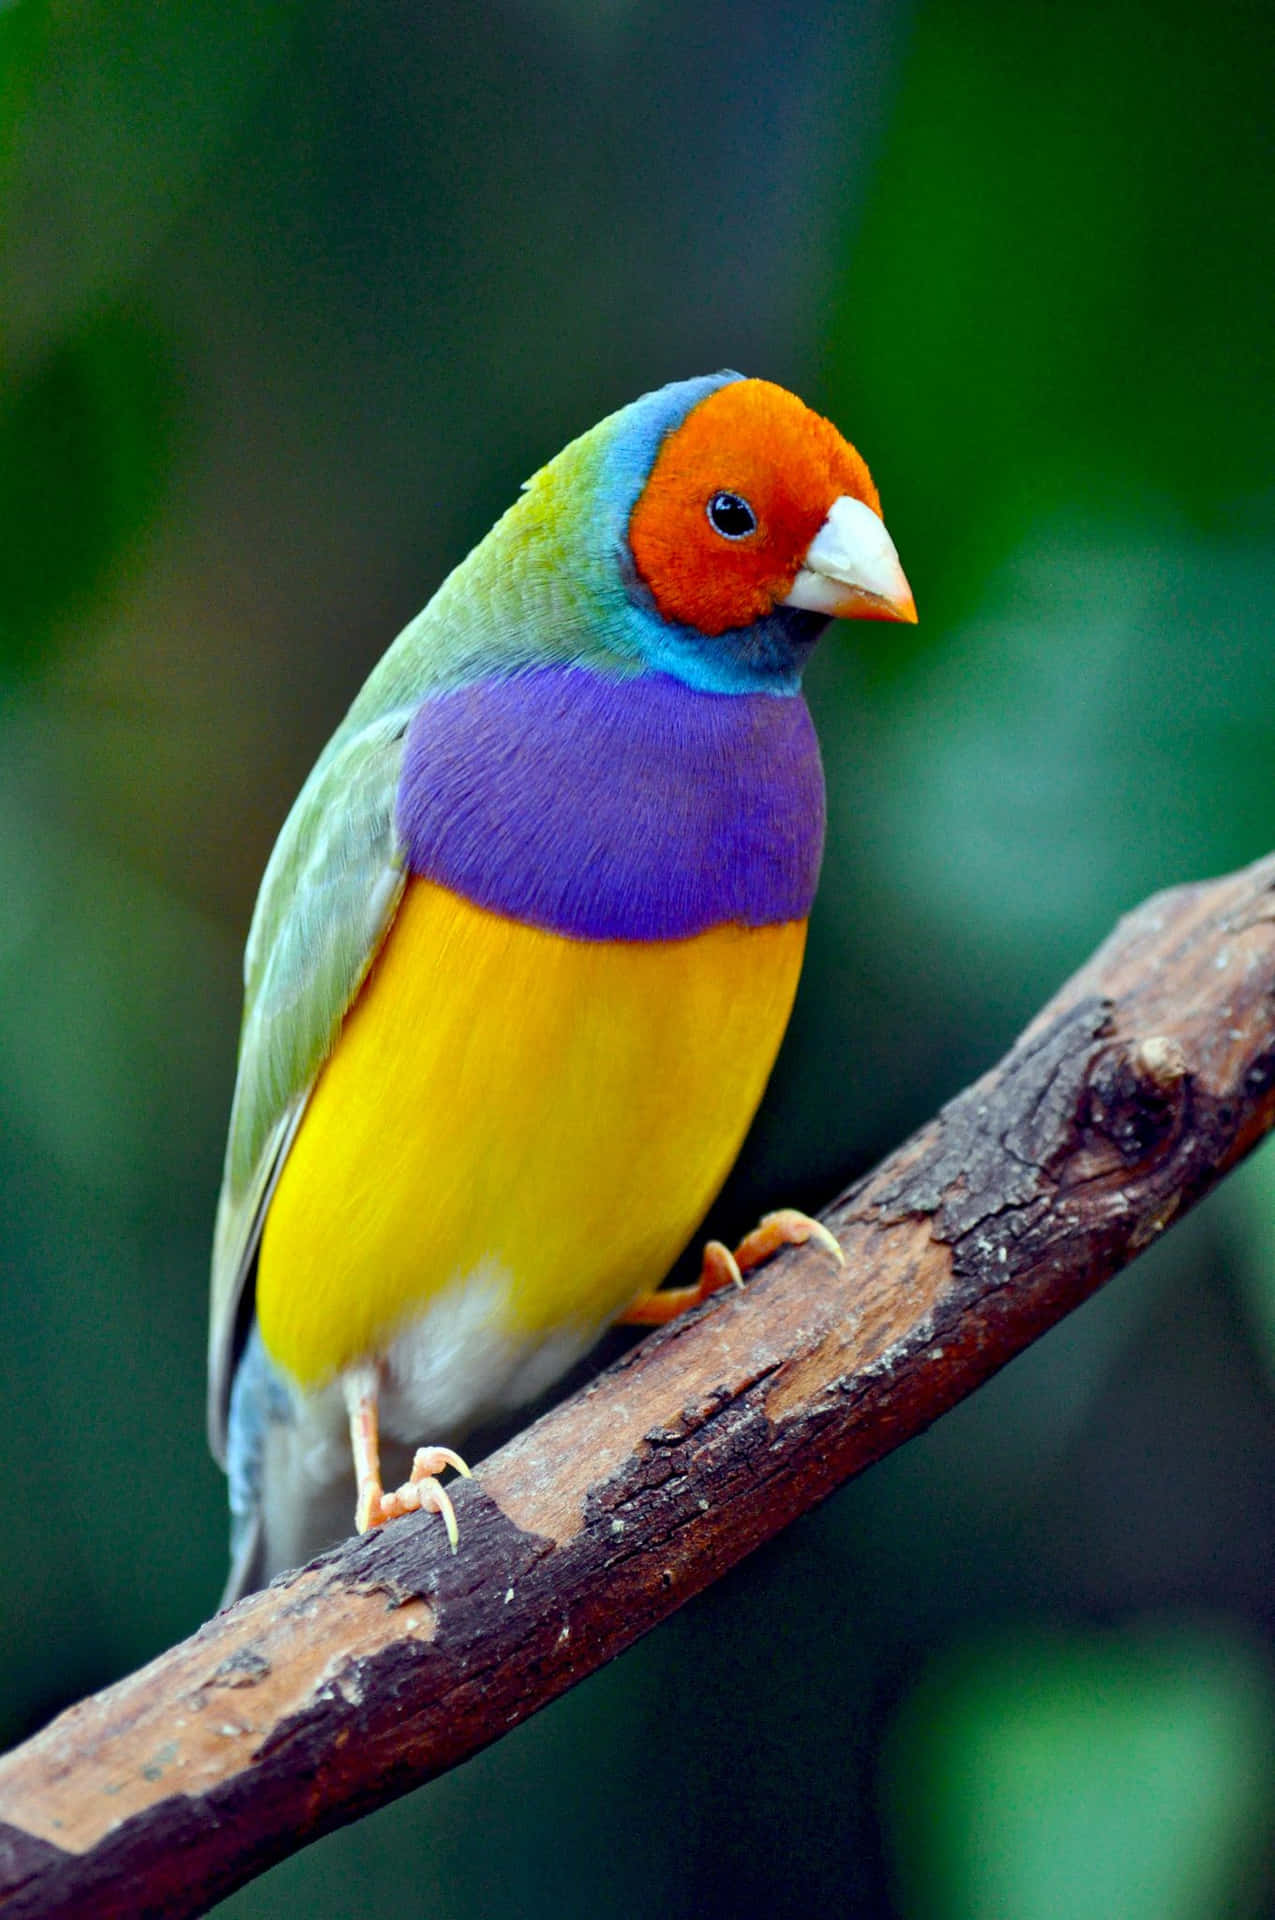 Marvel At The Beauty of These Colorful Birds